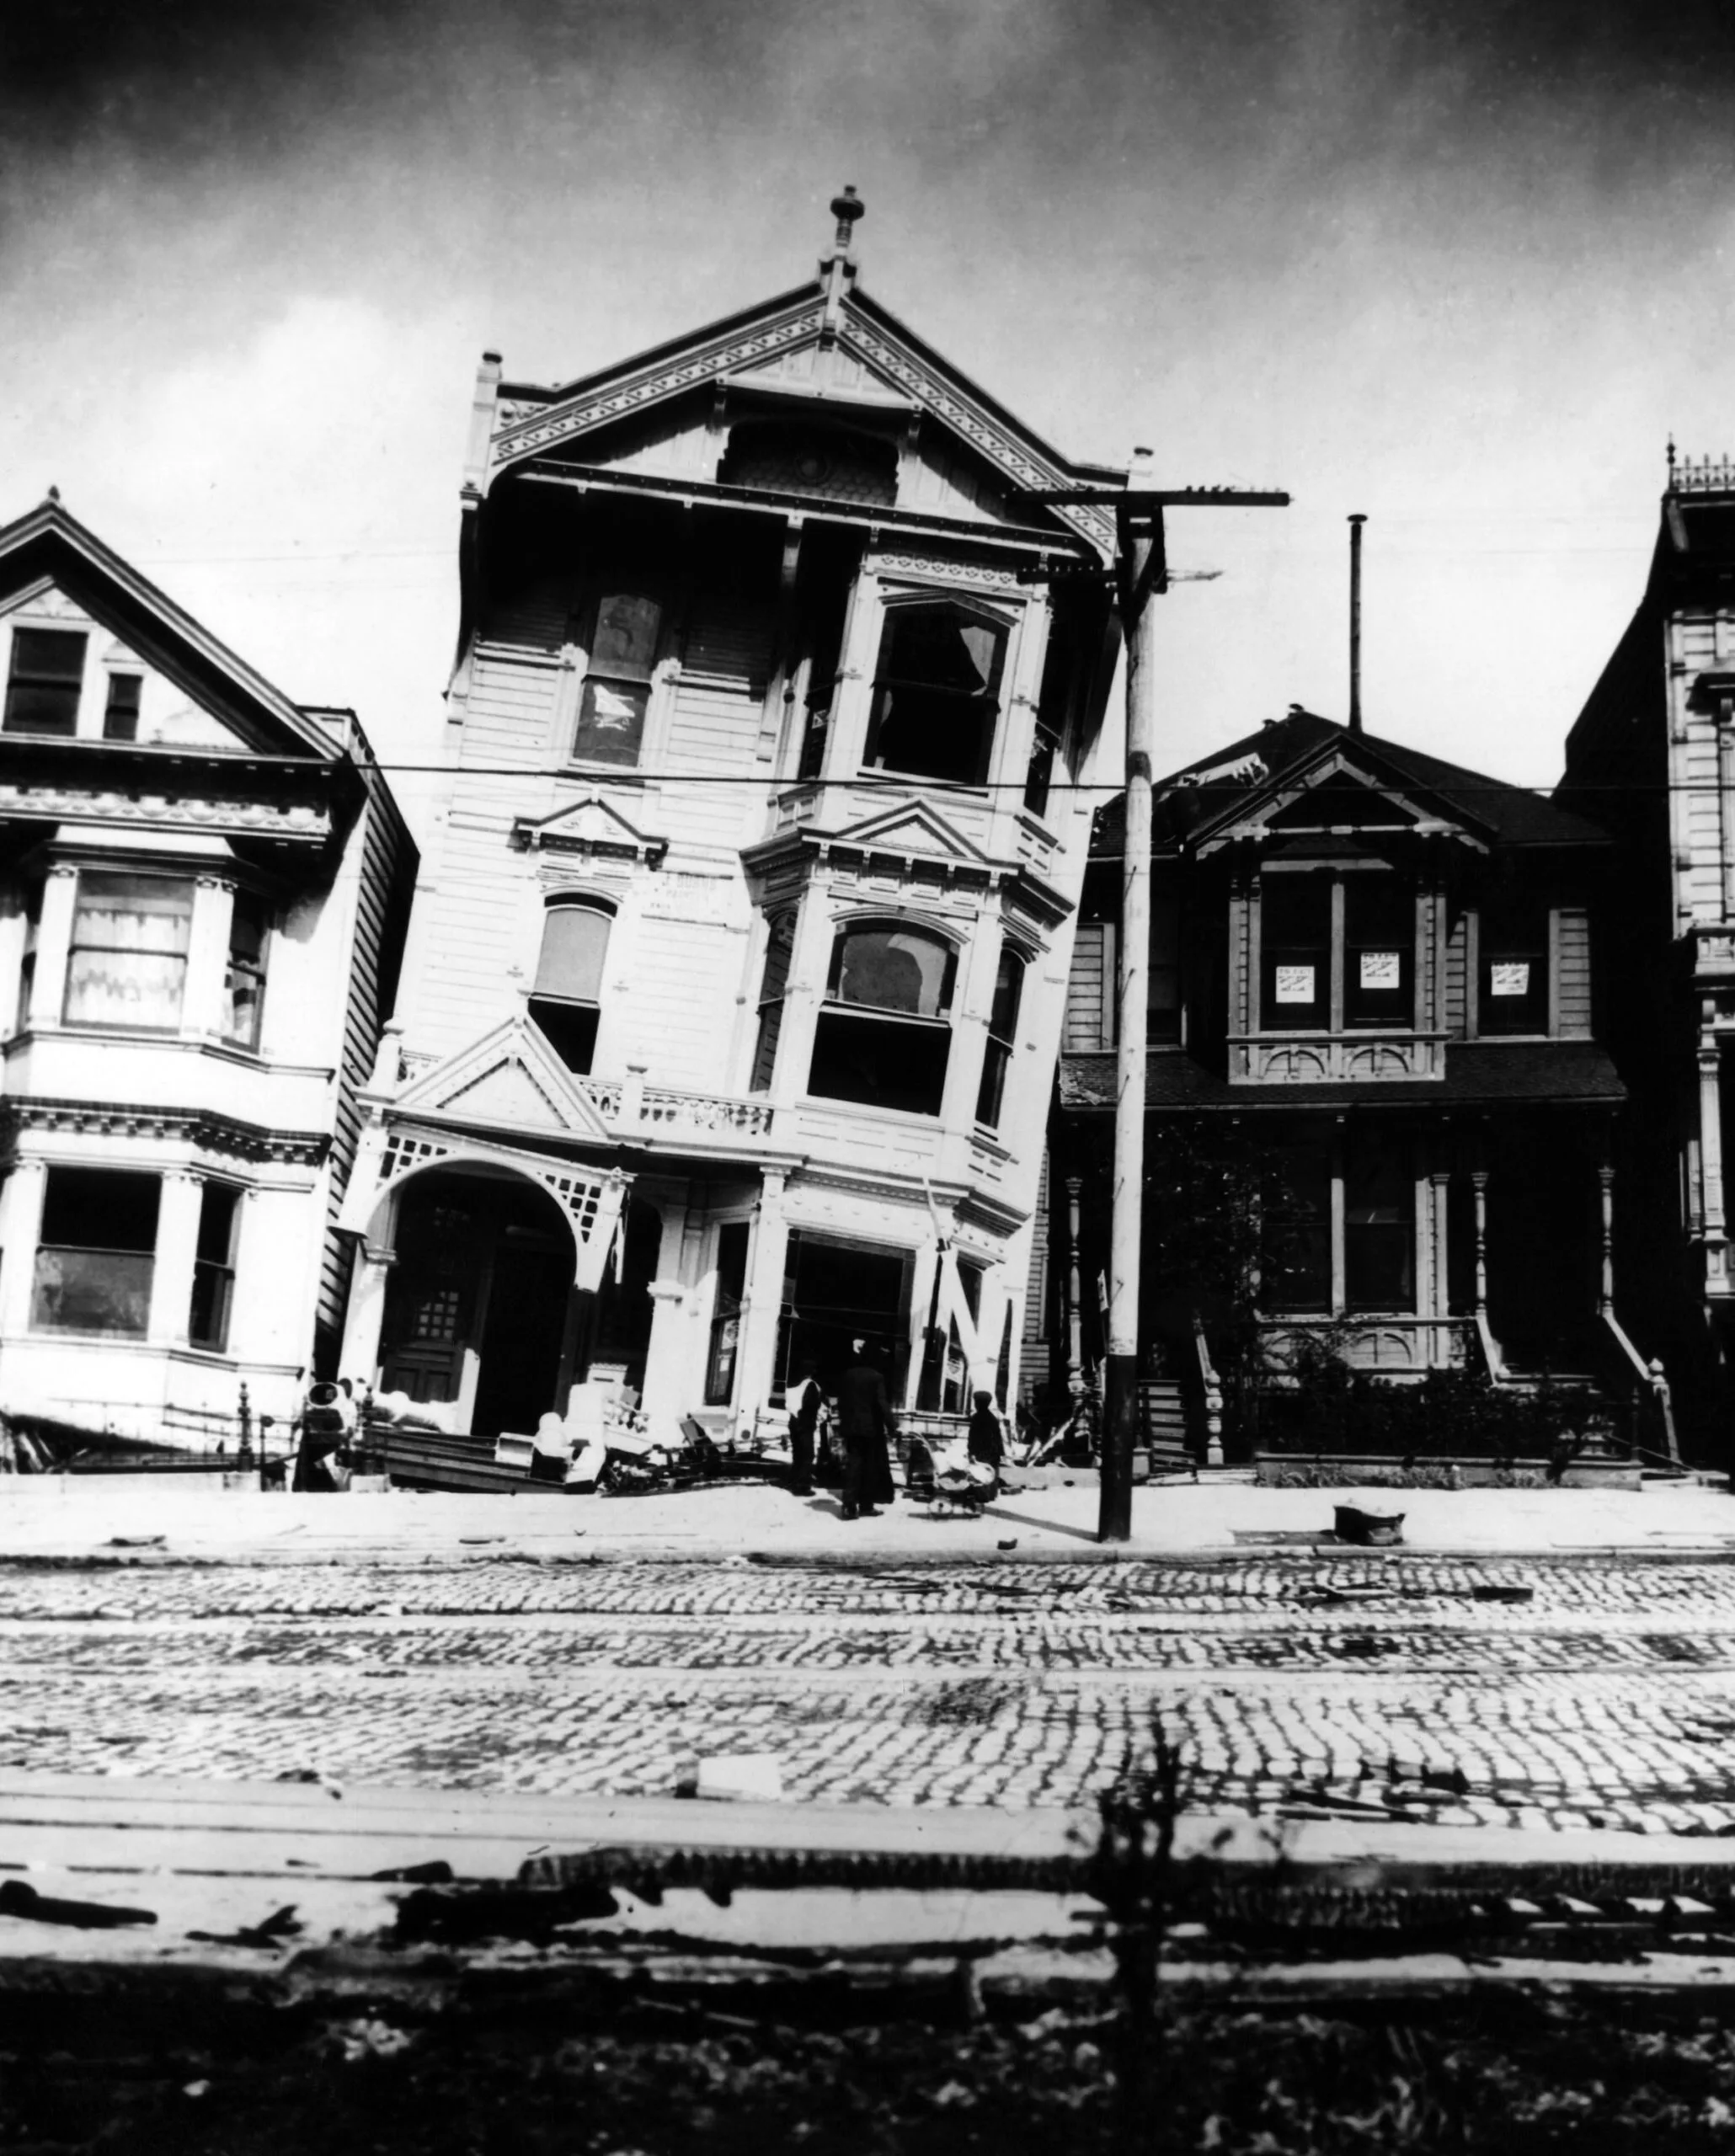 earthquake risk: how architectural features affect seismic resistance